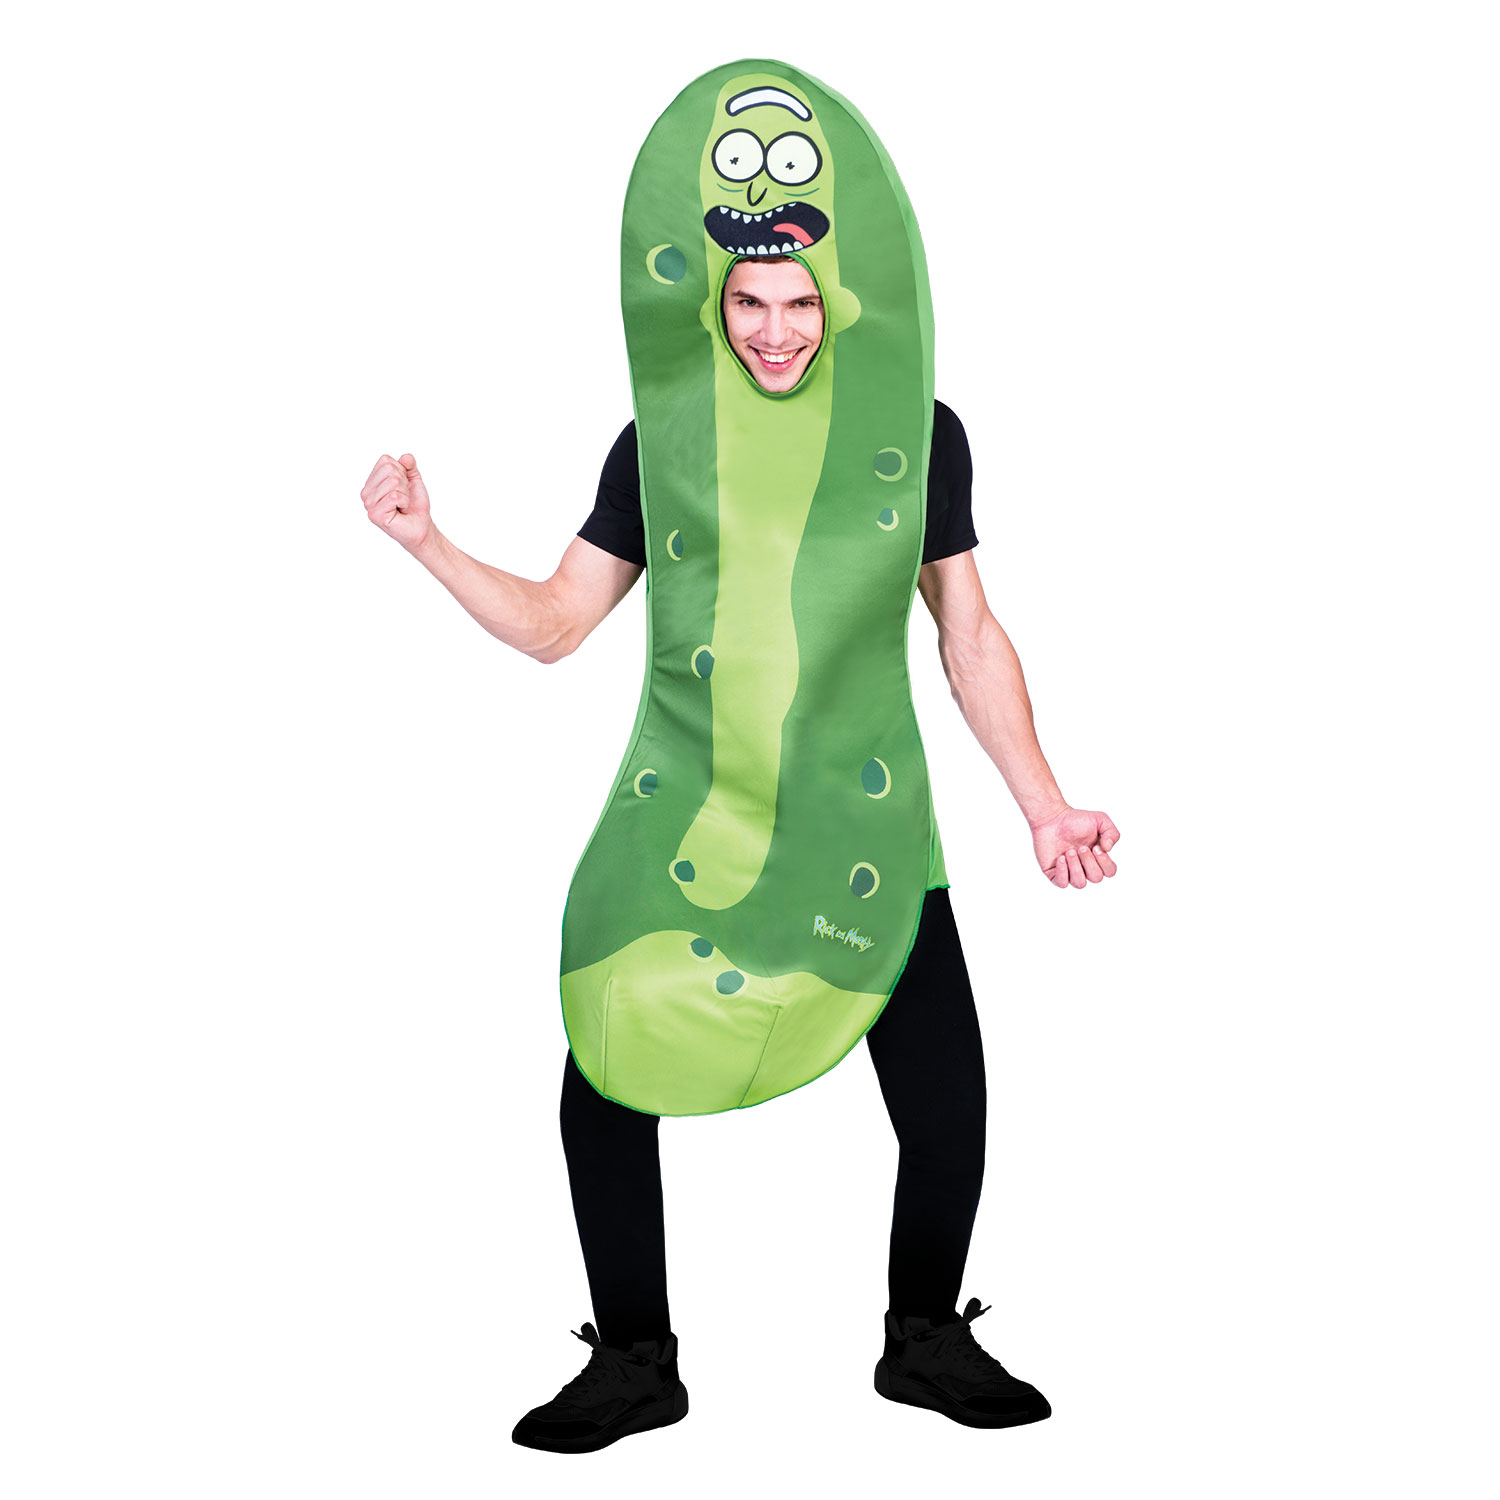 Pickle rick blow up costume